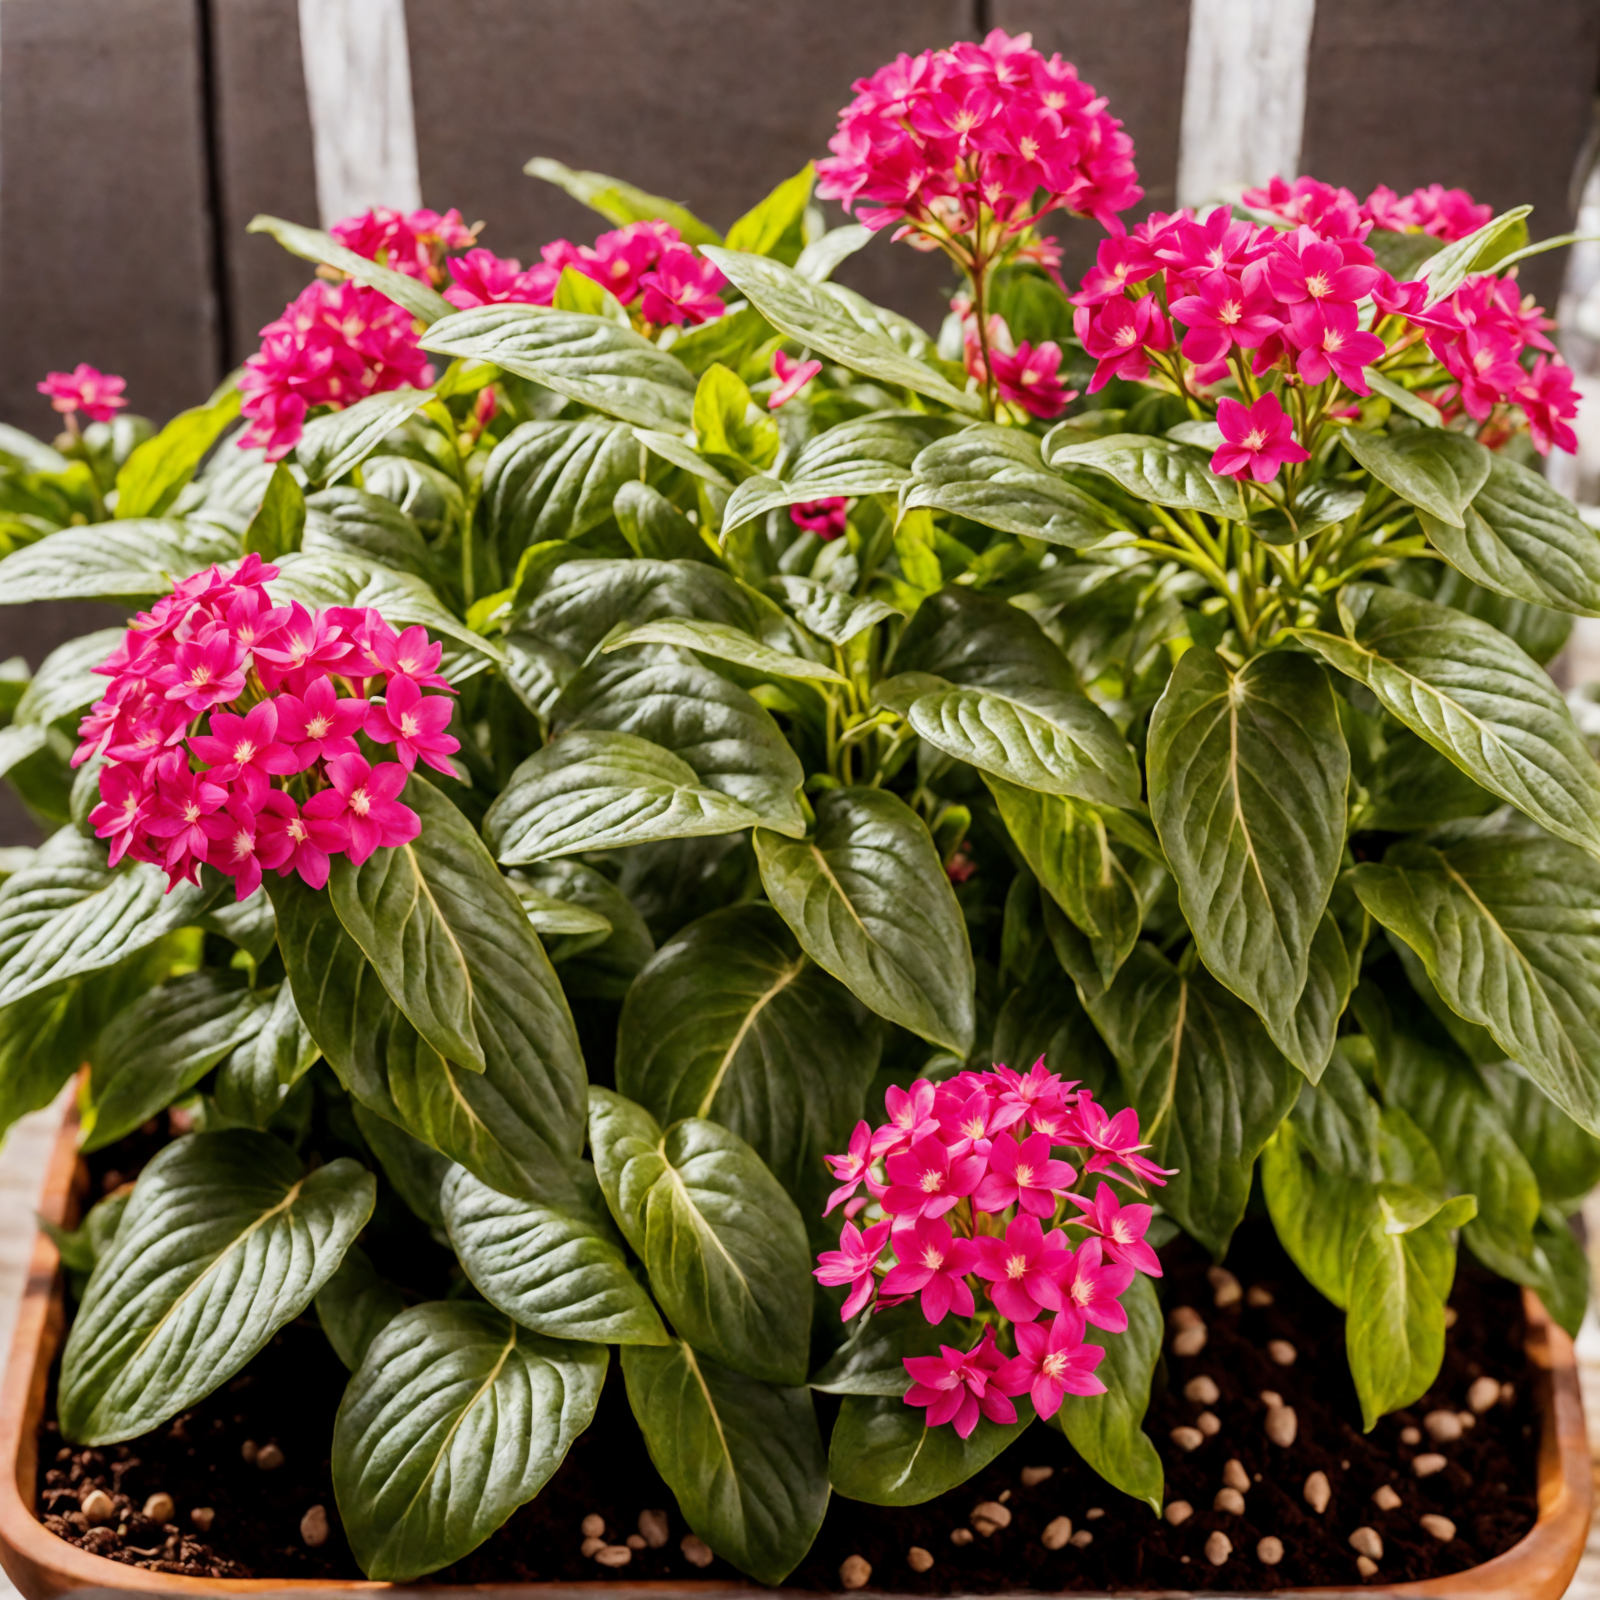 Pentas lanceolata with vibrant pink blooms in a pot, clear lighting, against a dark indoor background.